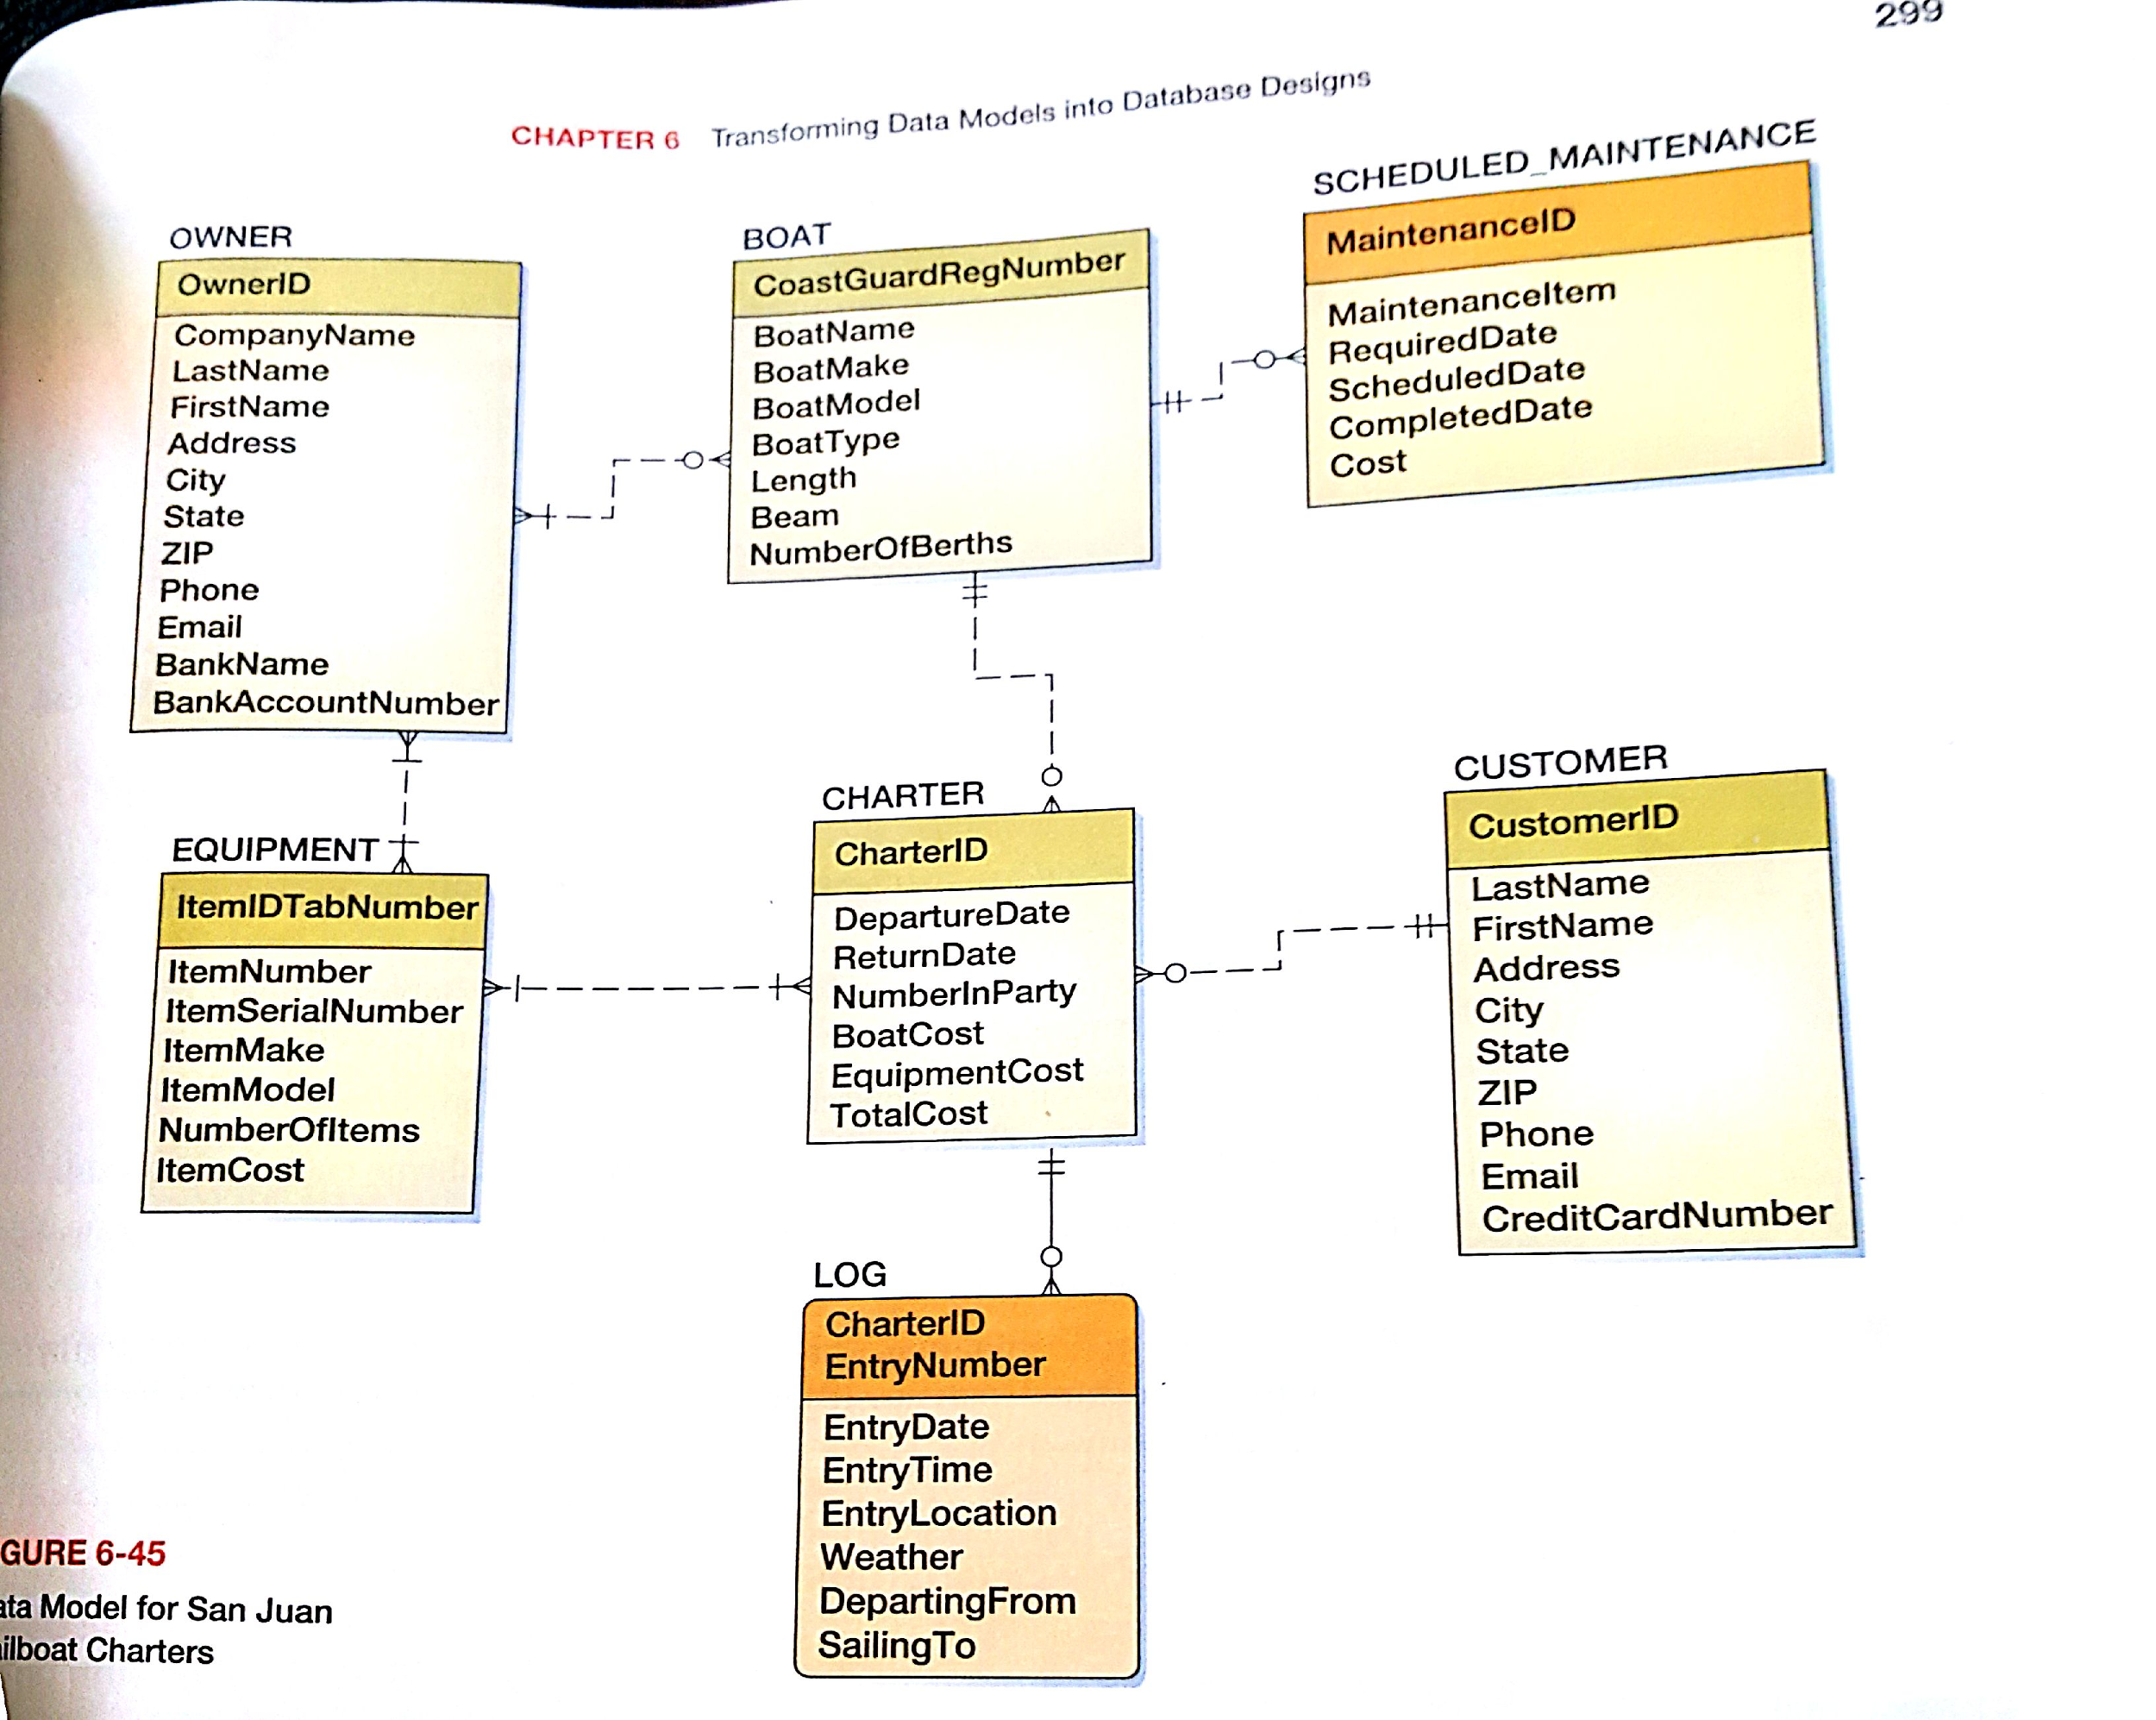 Solved Convert This Data Model To A Database Design. Spec...